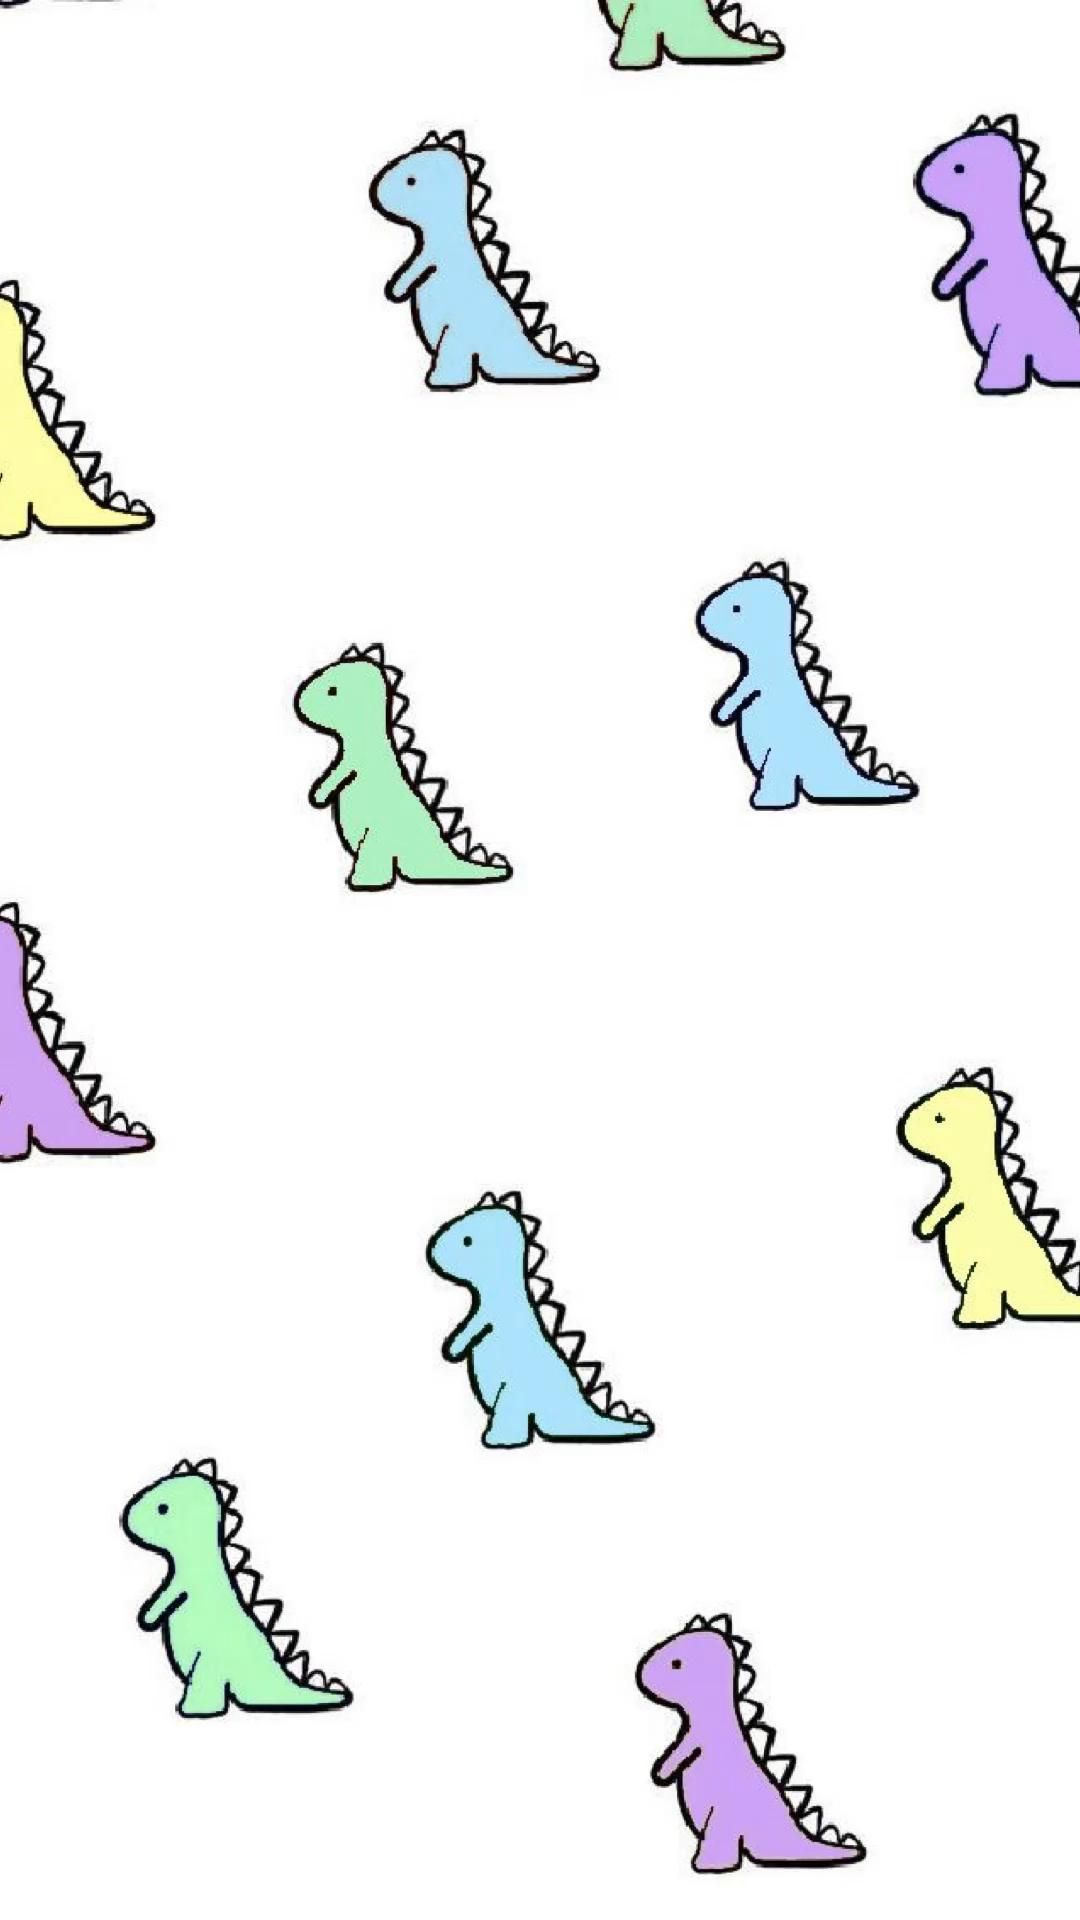 Dinosaur aesthetic wallpaper for iPhone. iPhone wallpaper, Cute tumblr wallpaper, iPhone wallpaper girly